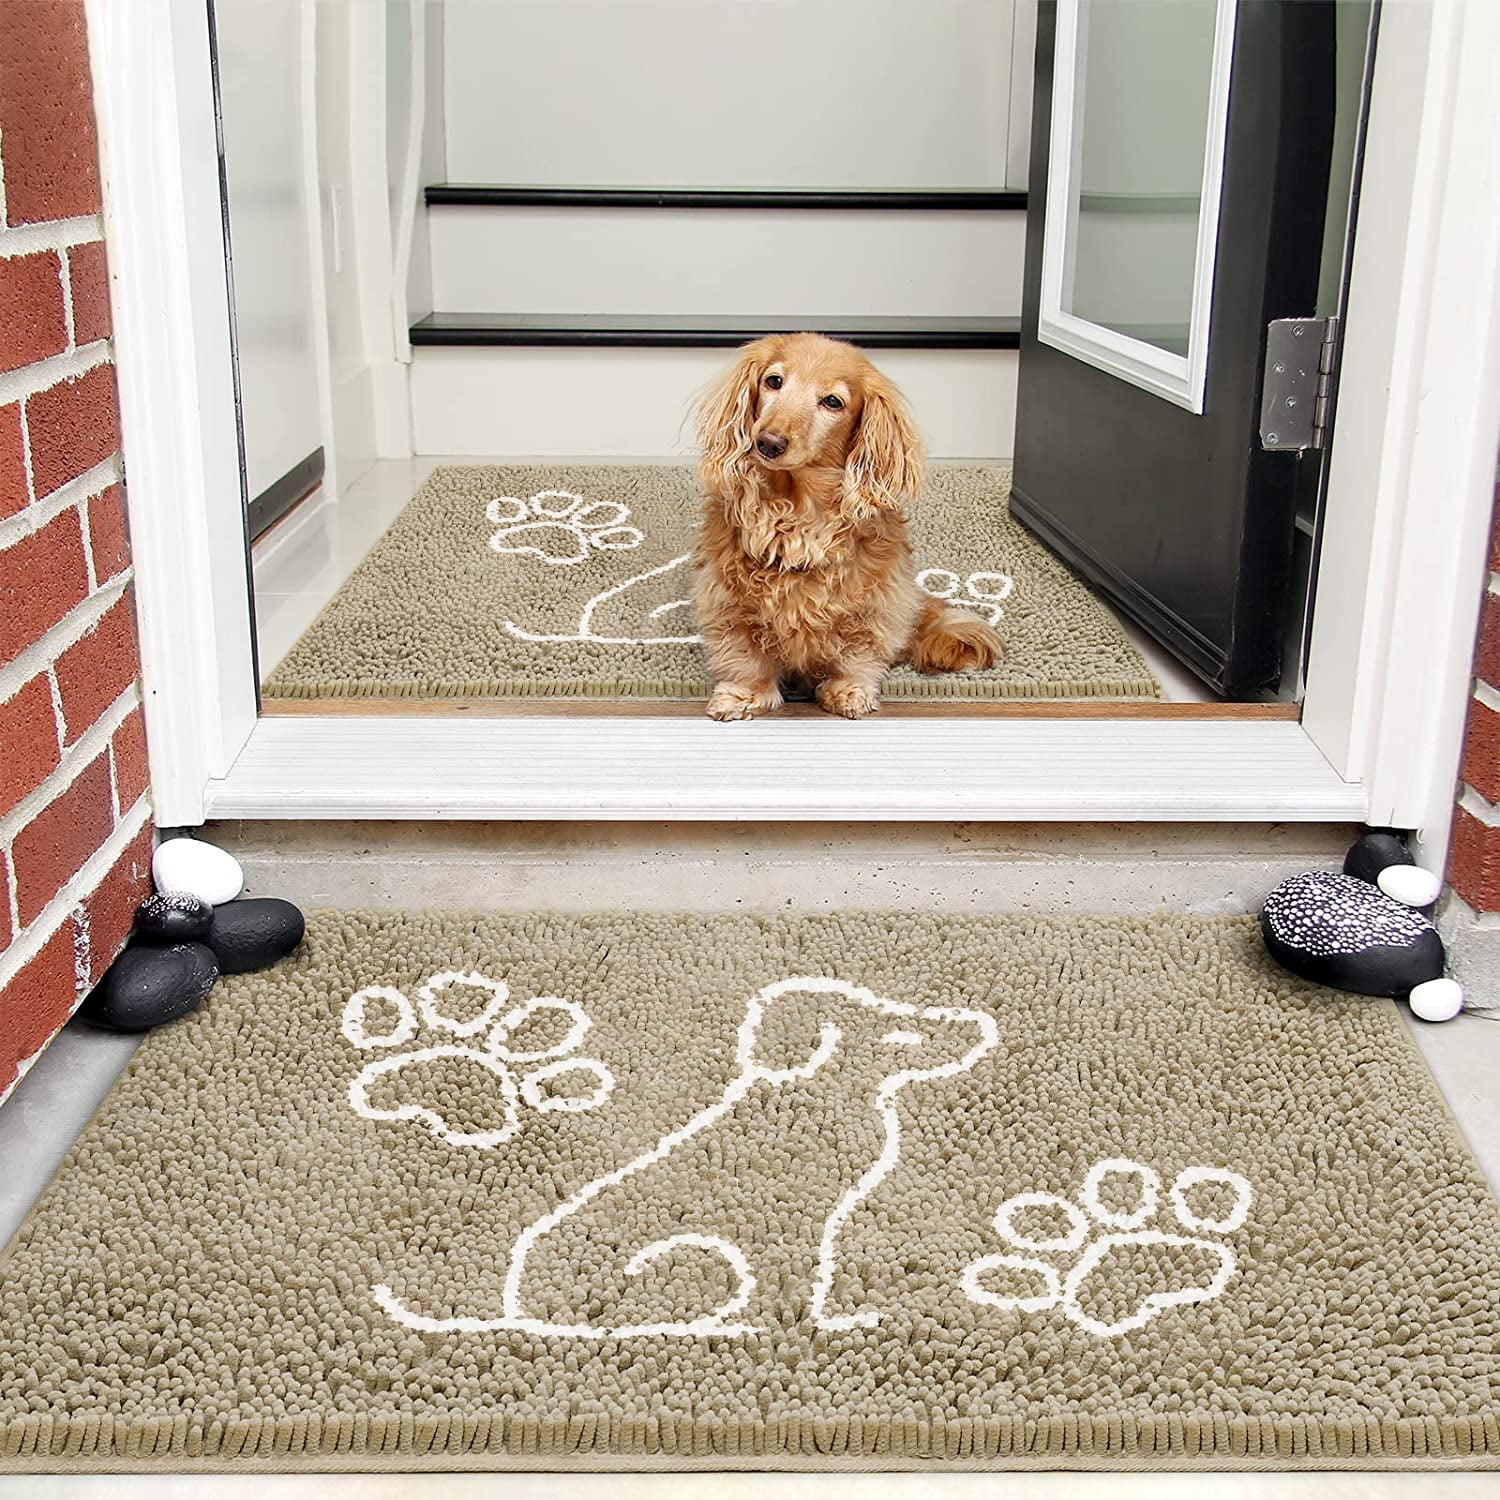 Ompaa Indoor Muddy Door Mats for Dirty Dogs Paws and Mud Shoes, 32x20  camel, Funny Inside Welcome Absorbent chenille Doormat for